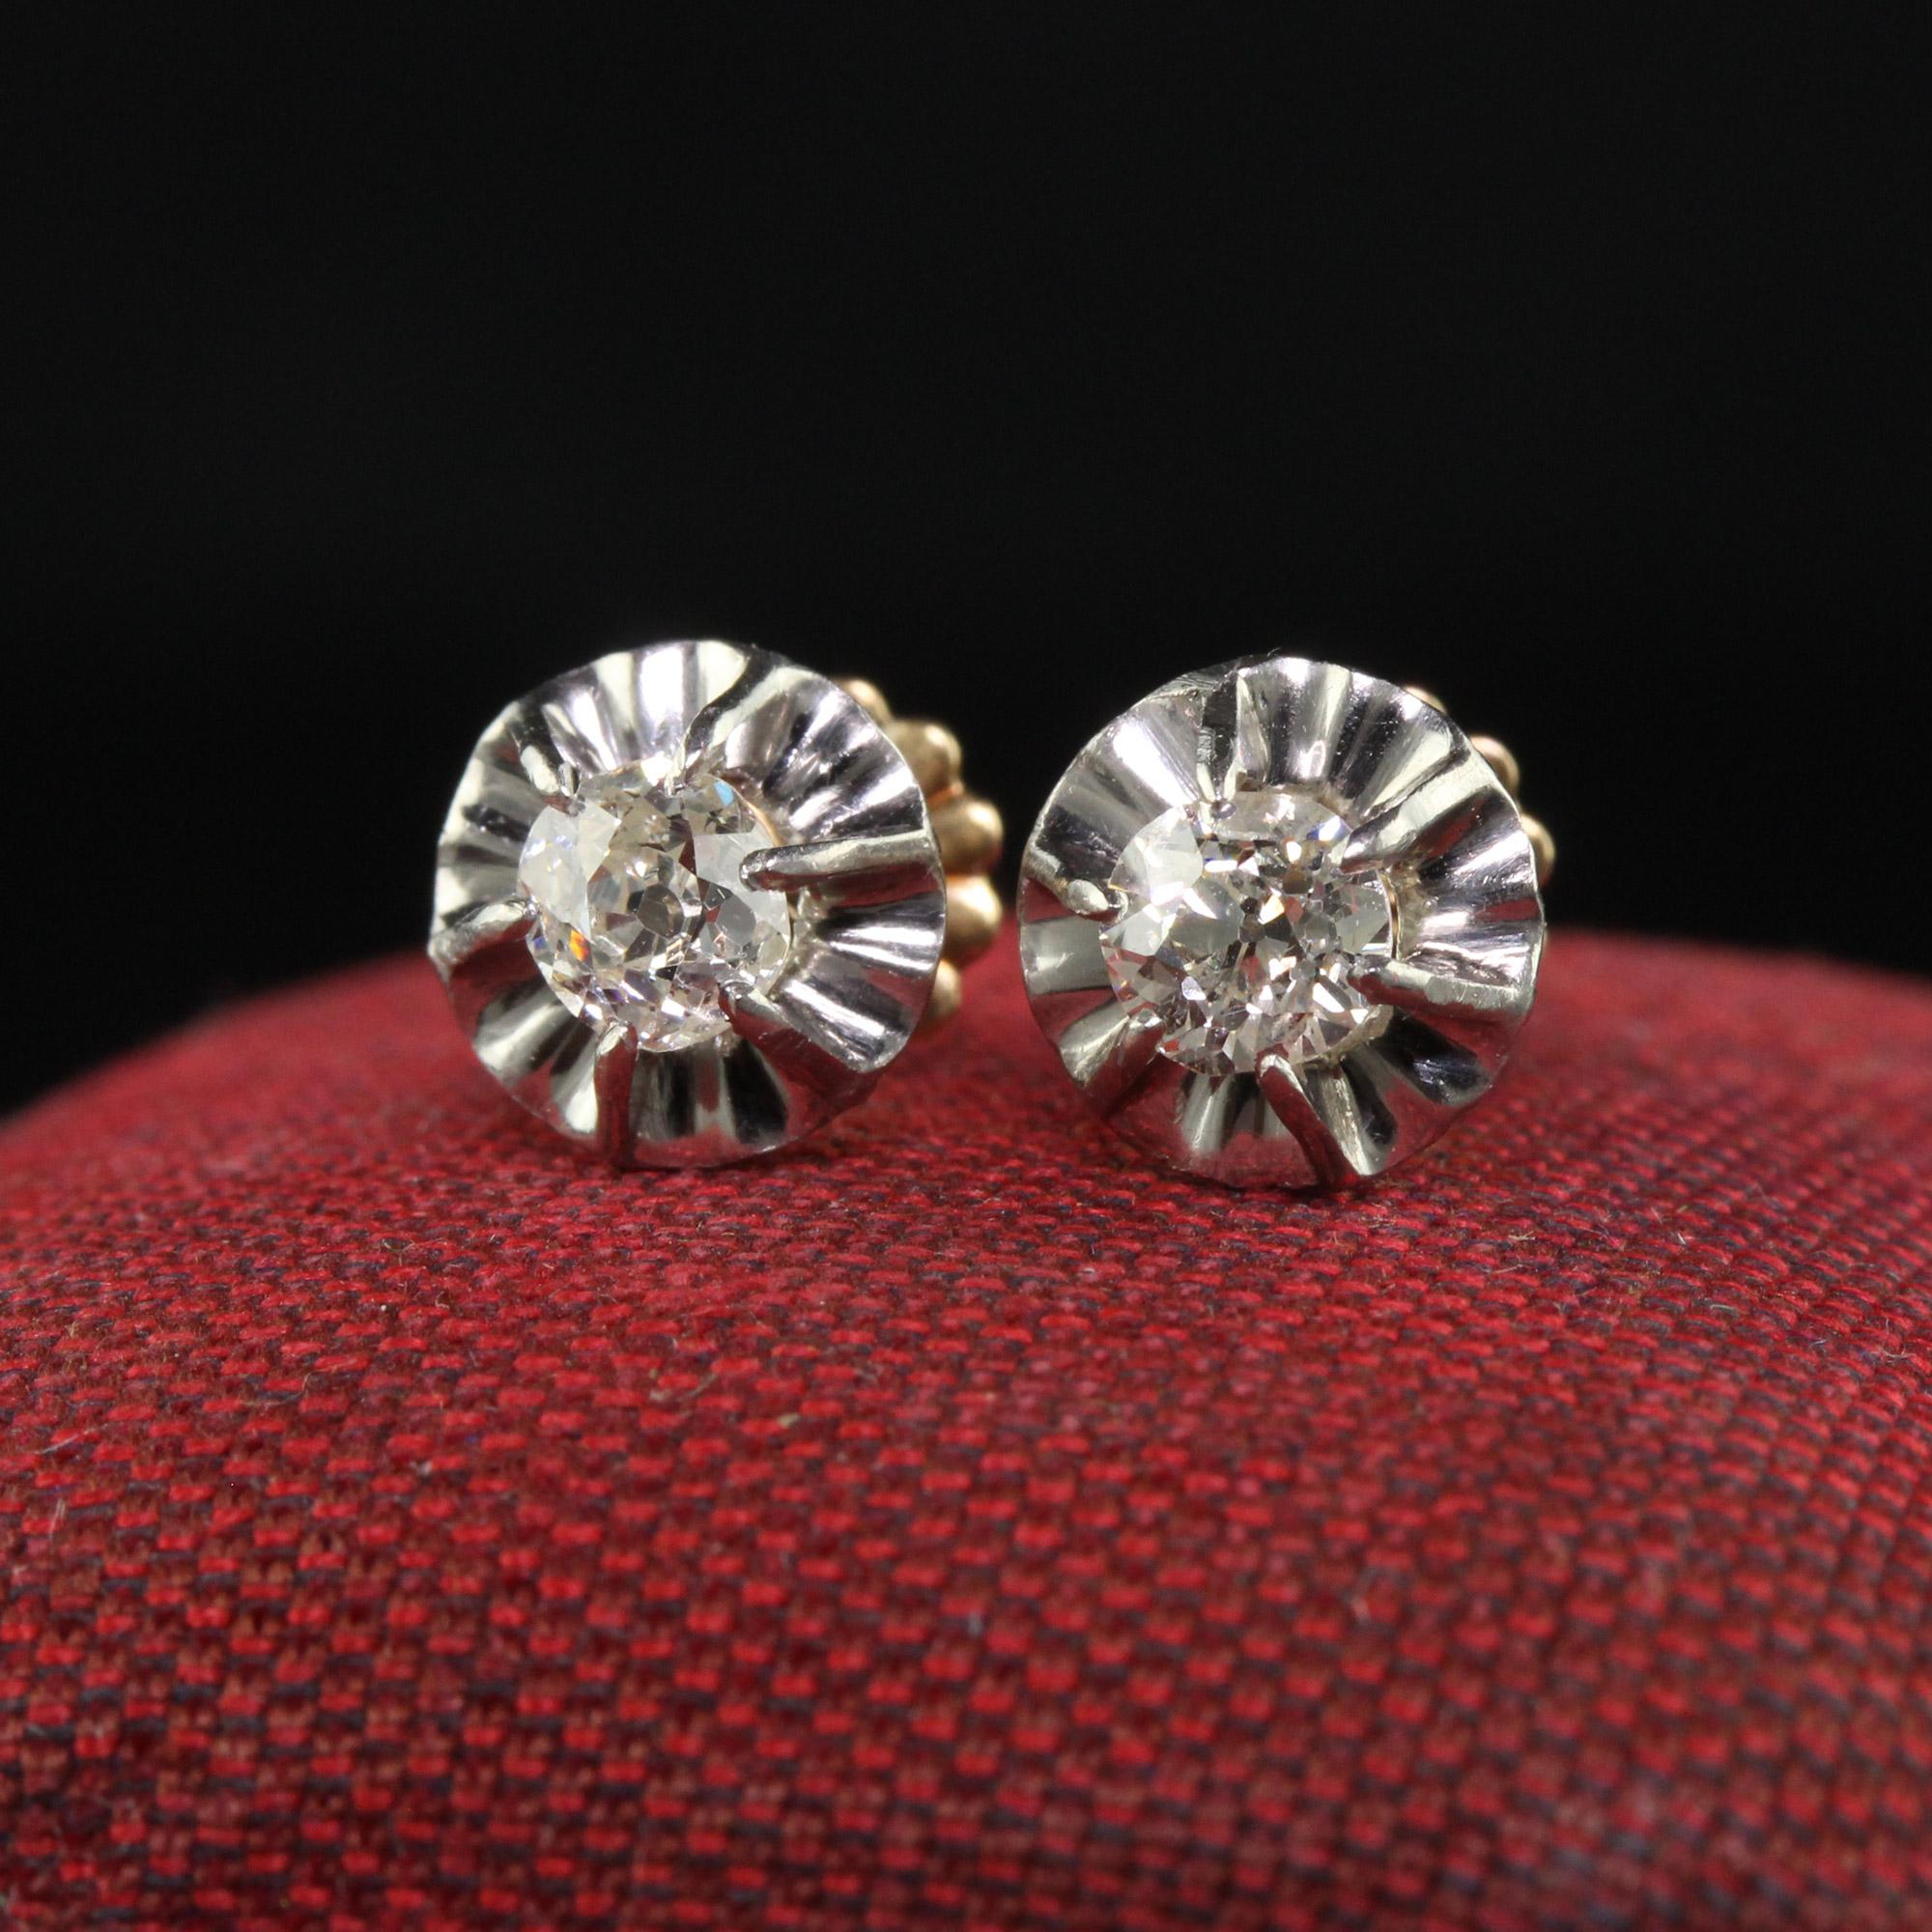 Beautiful Antique Edwardian 18K Yellow Gold and Platinum Old Mine Diamond Stud Earrings. This gorgeous pair of old mine diamond earrings are crafted in 18k yellow gold and platinum. The studs are set with chunky old mine cut diamonds. The setting is